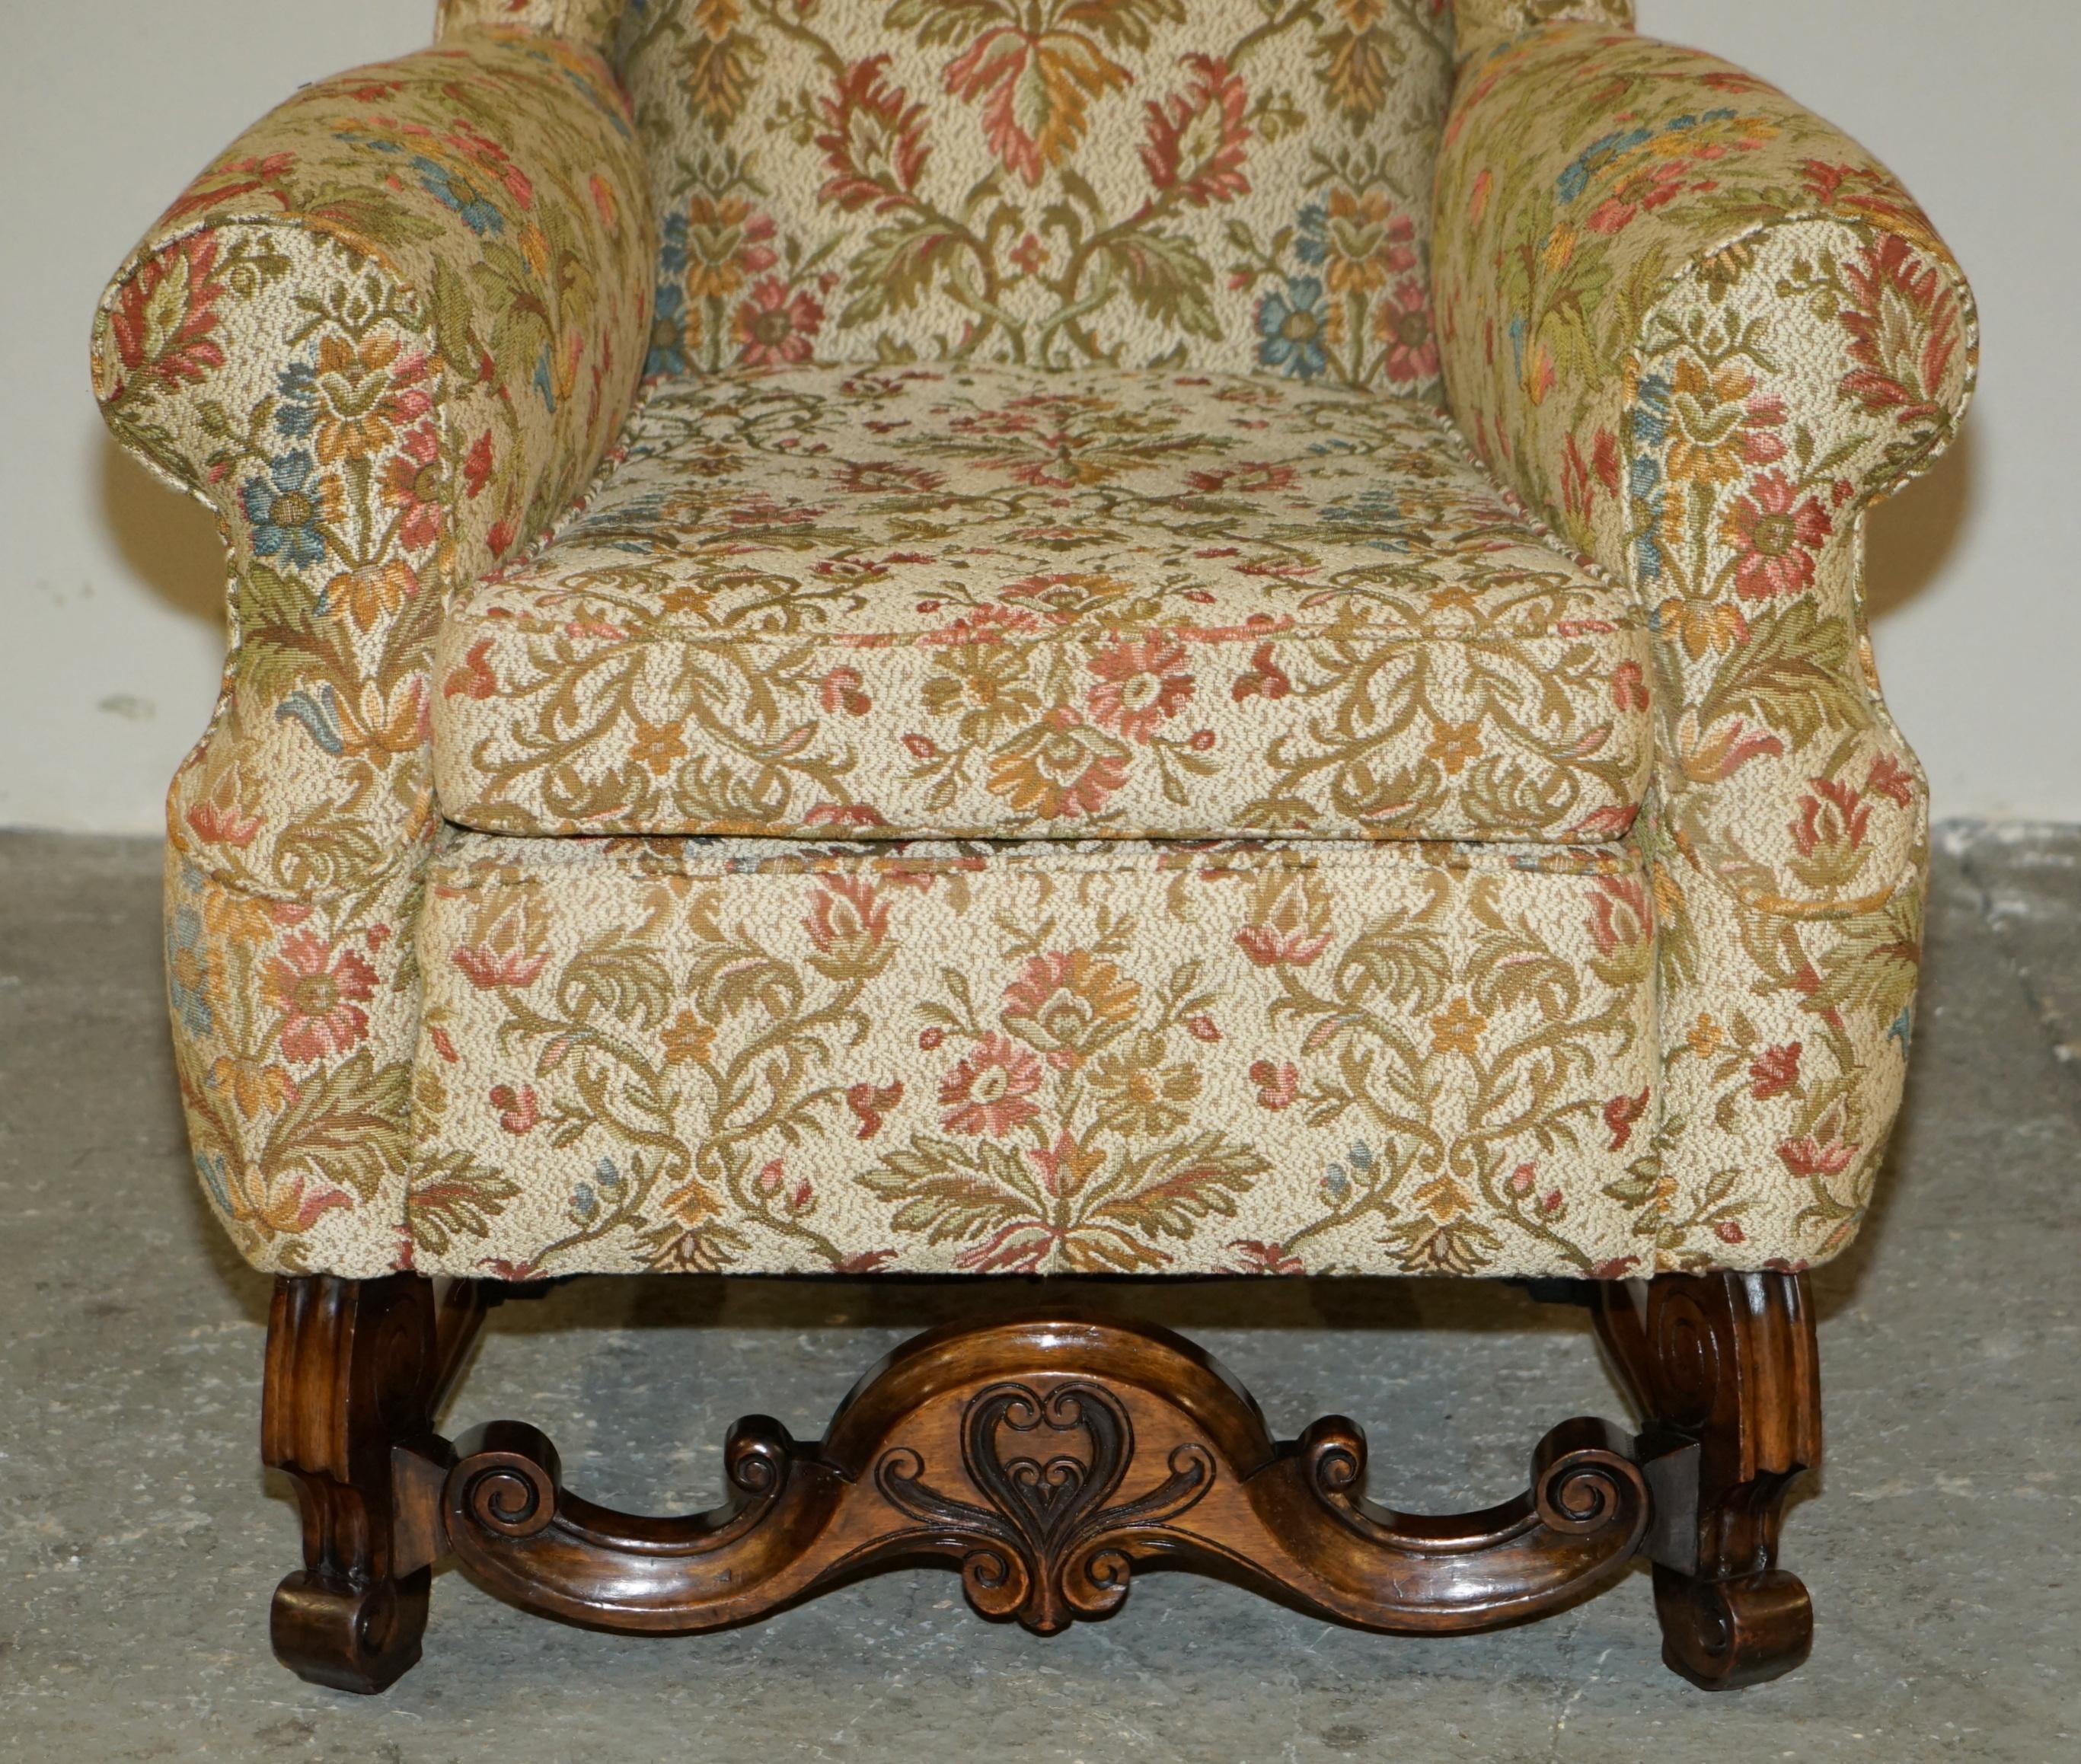 Hand-Crafted PAIR OF ANTIQUE ITALIAN CAROLEAN HIGH BACK WiNGBACK ARMCHAIRS FOR UPHOLSTERY For Sale